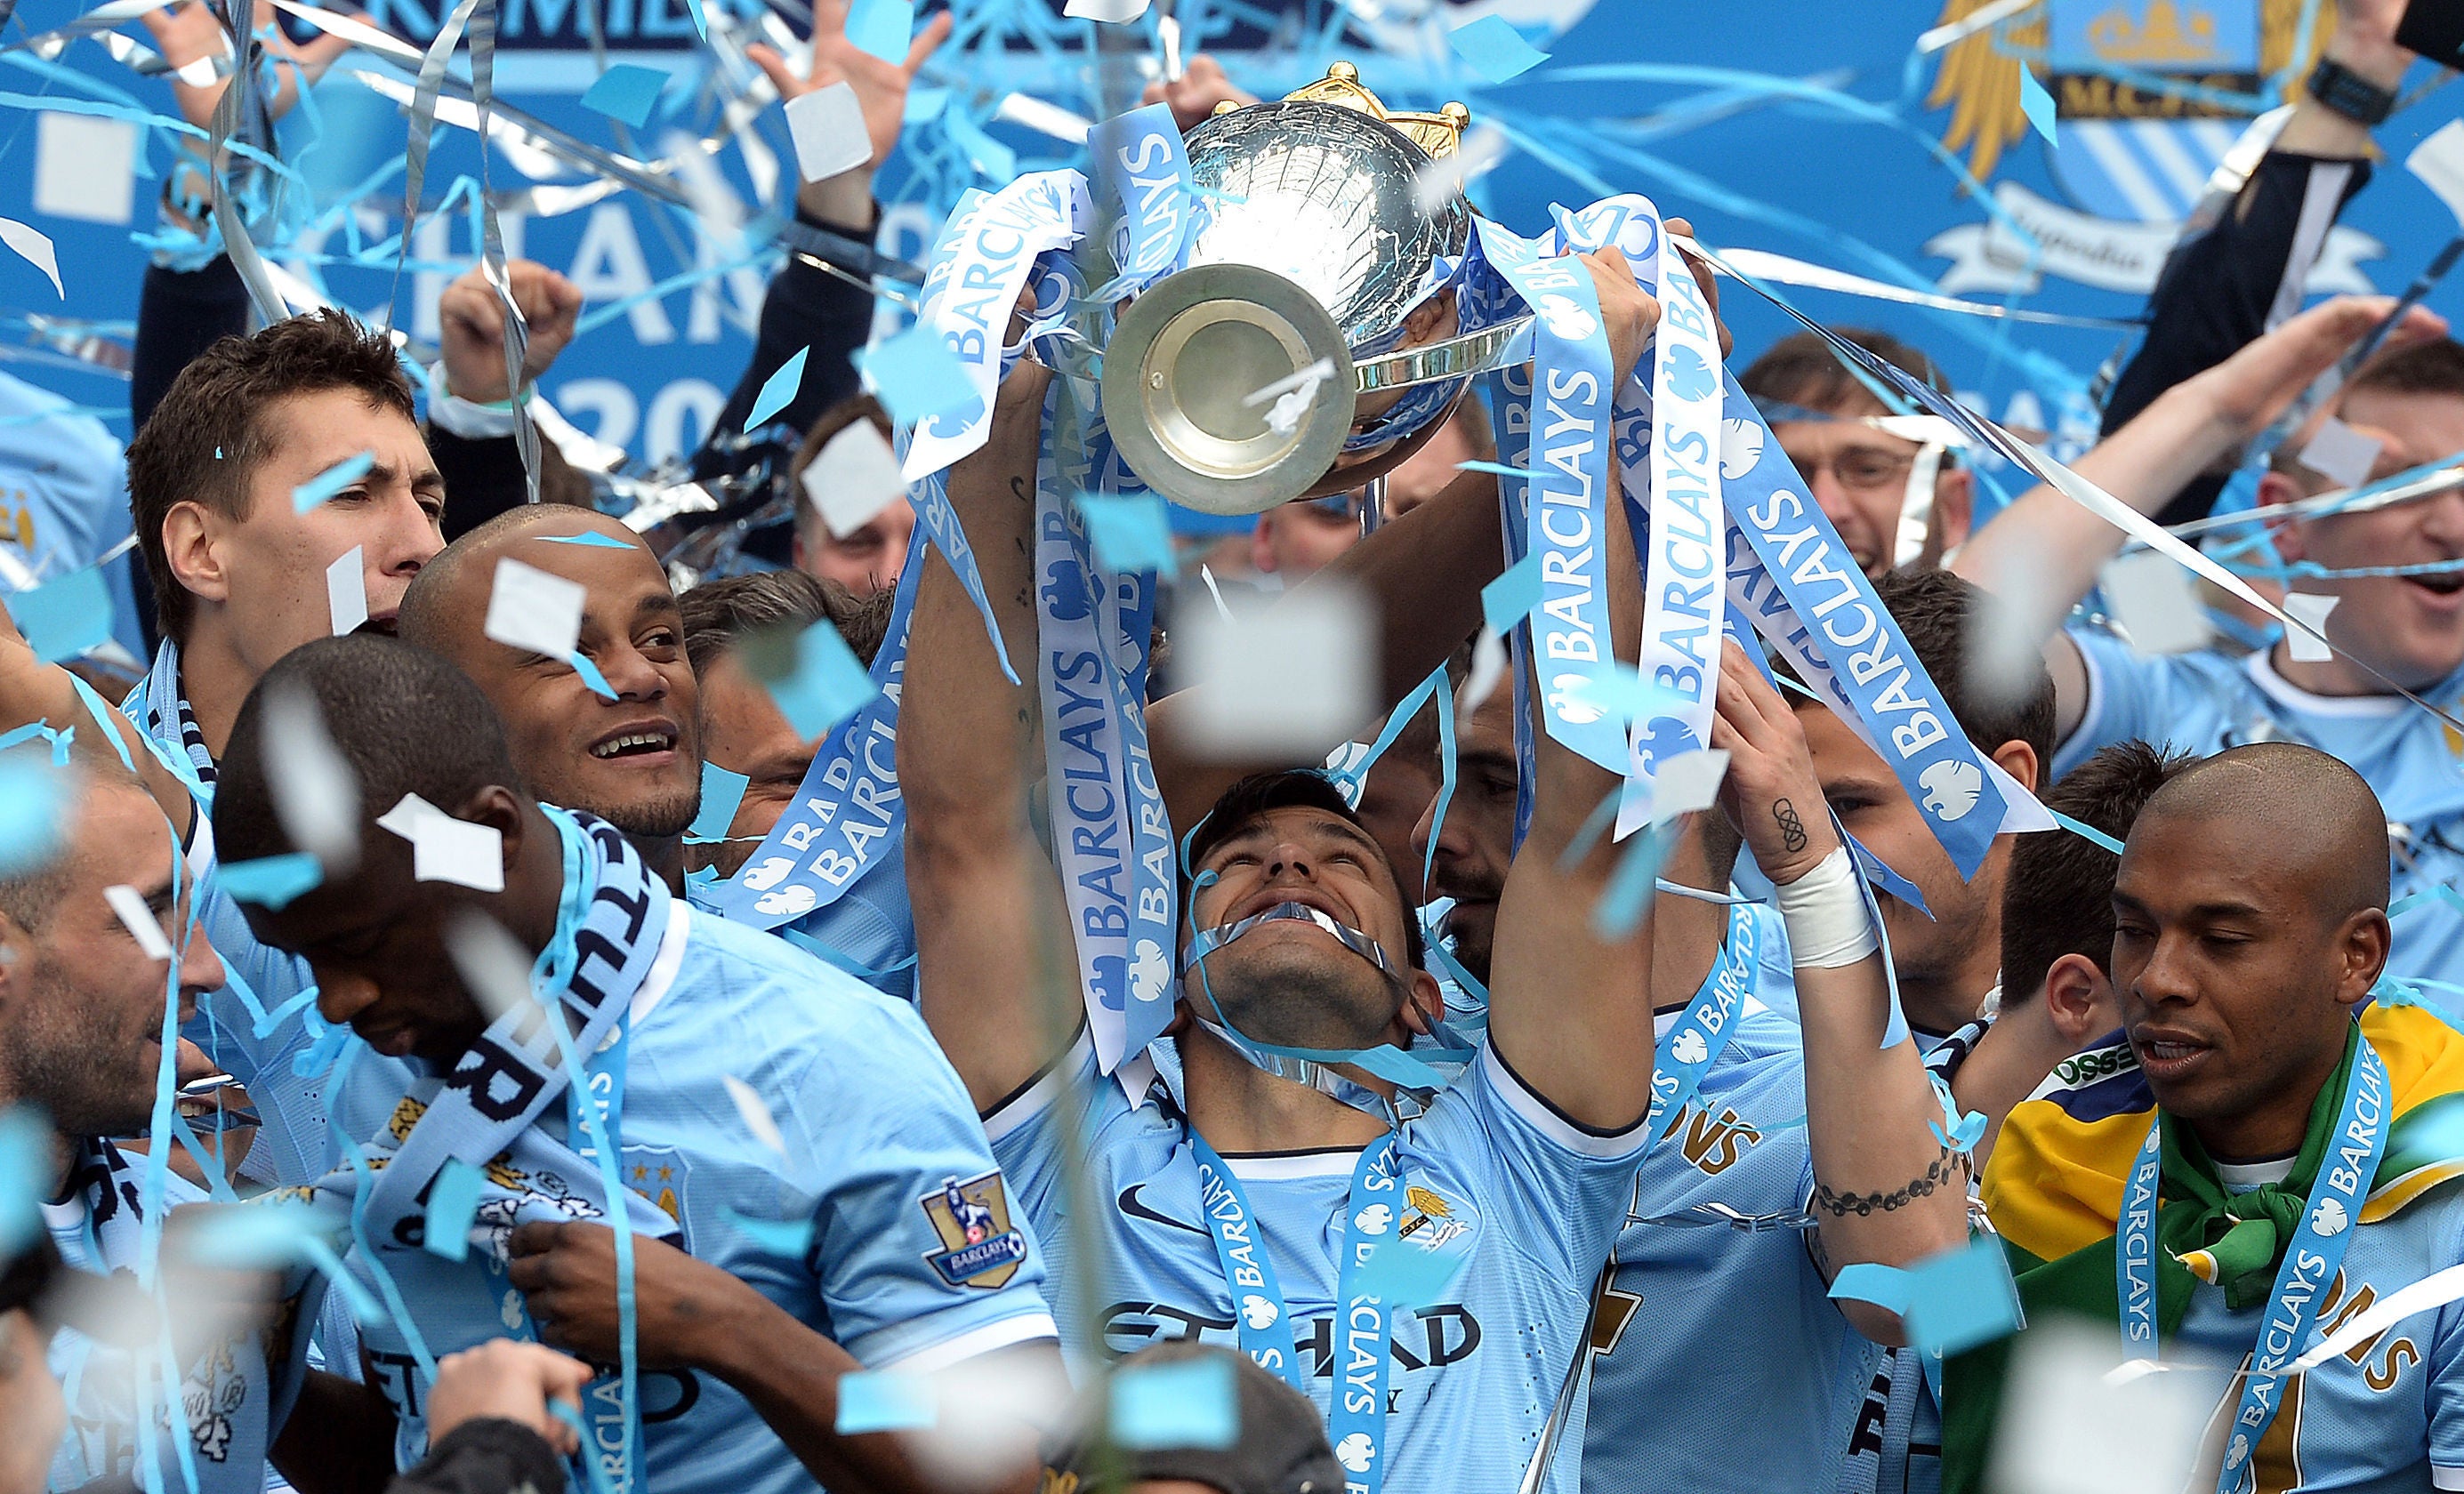 Manchester City will be presented with the Premier League trophy on Sunday